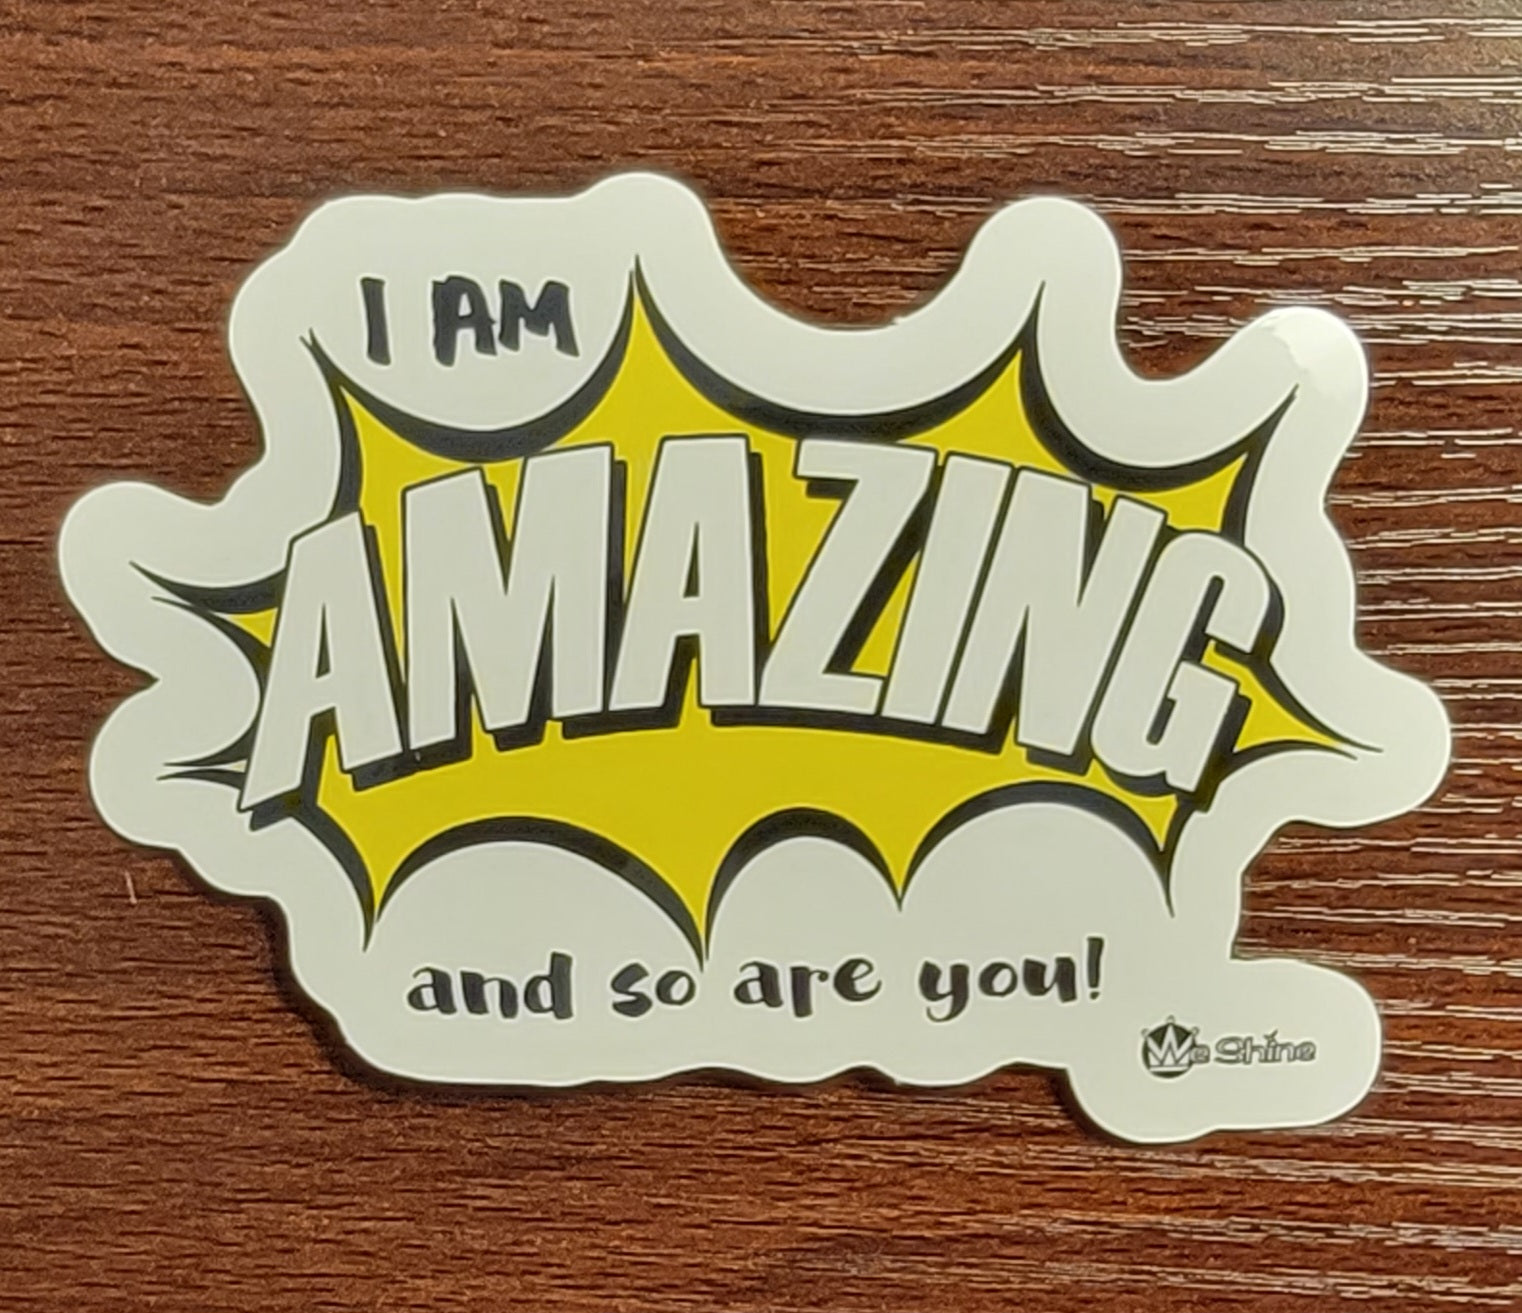 I am AMAZING (and so are you!) - Vinyl Decal